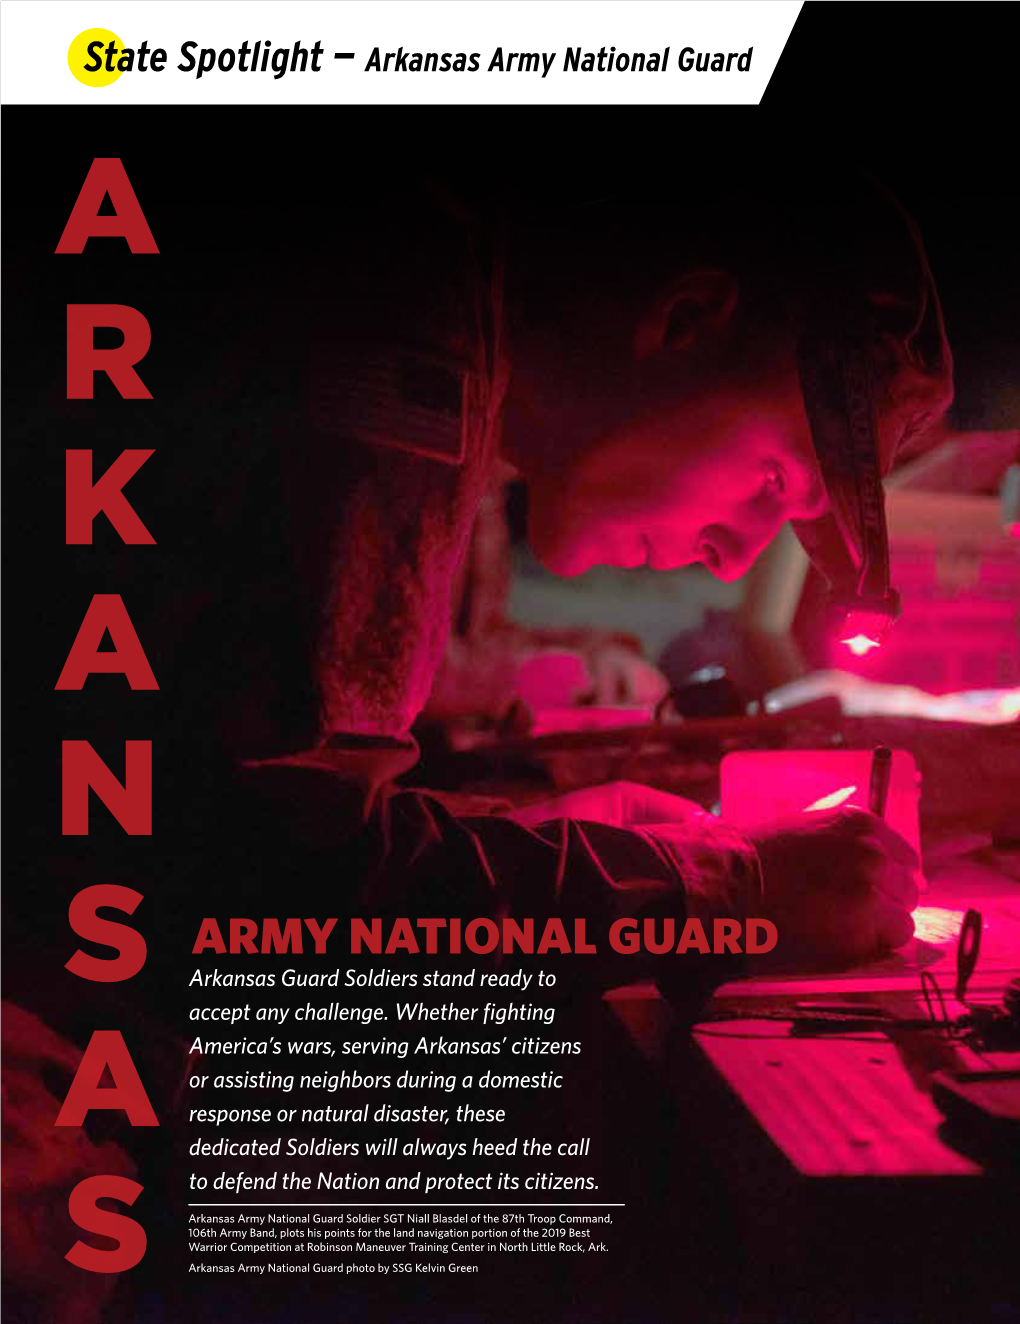 Arkansas Army National Guard a R K a N ARMY NATIONAL GUARD S Arkansas Guard Soldiers Stand Ready to Accept Any Challenge